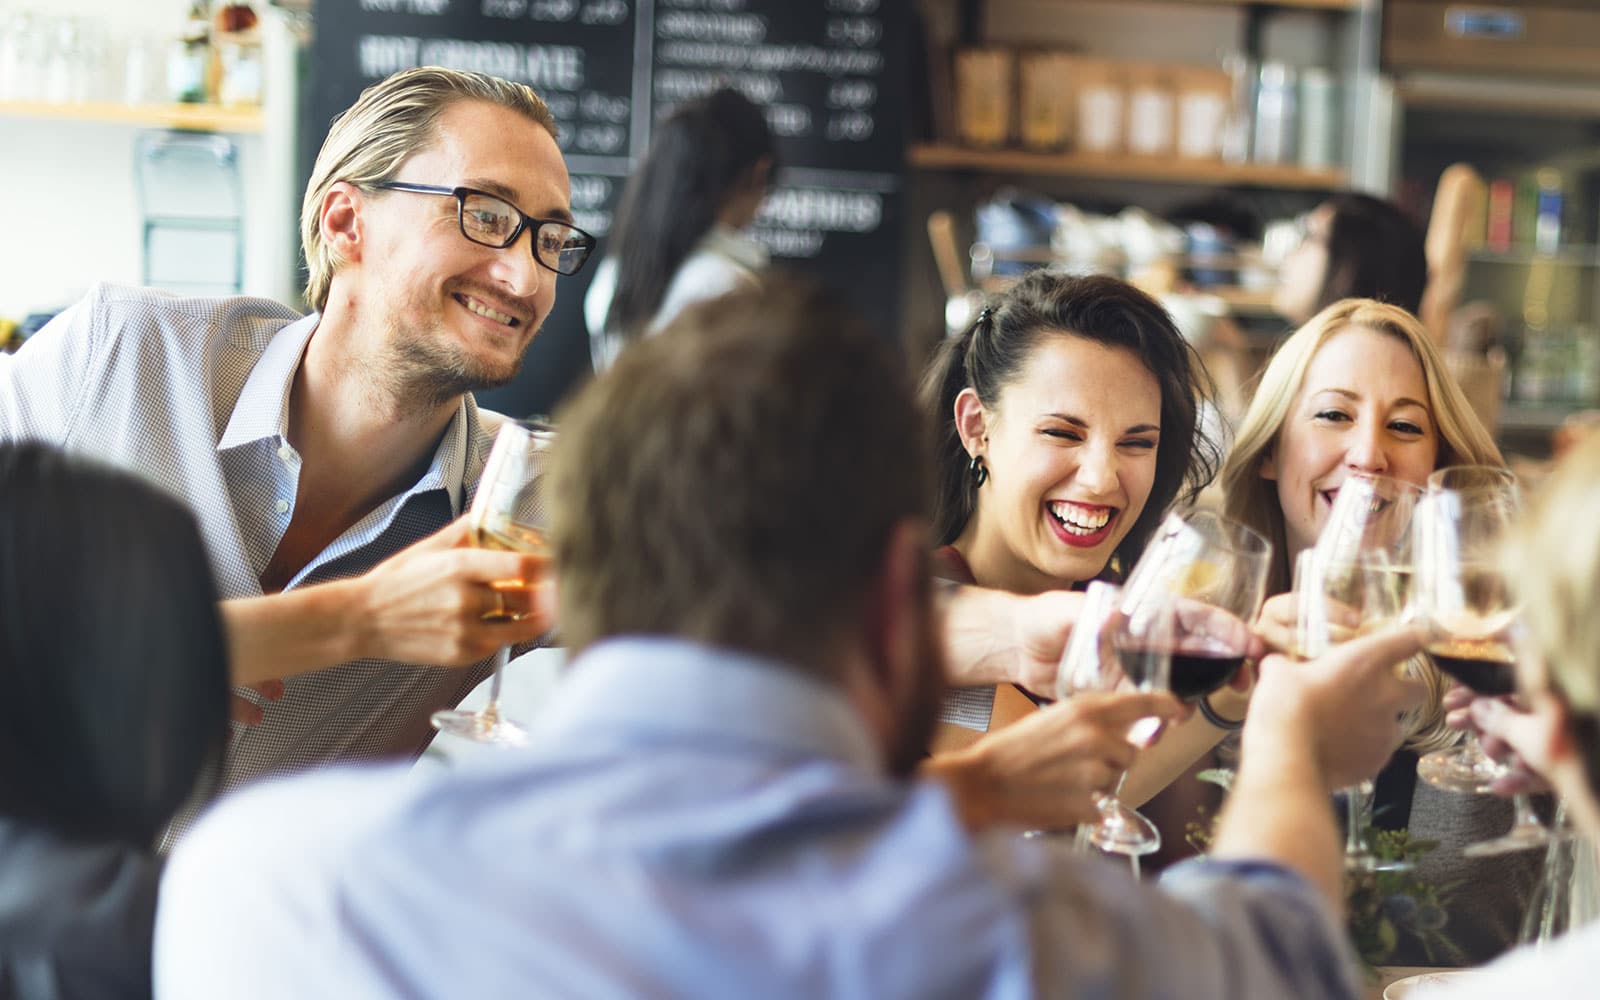 Host events at your restaurant